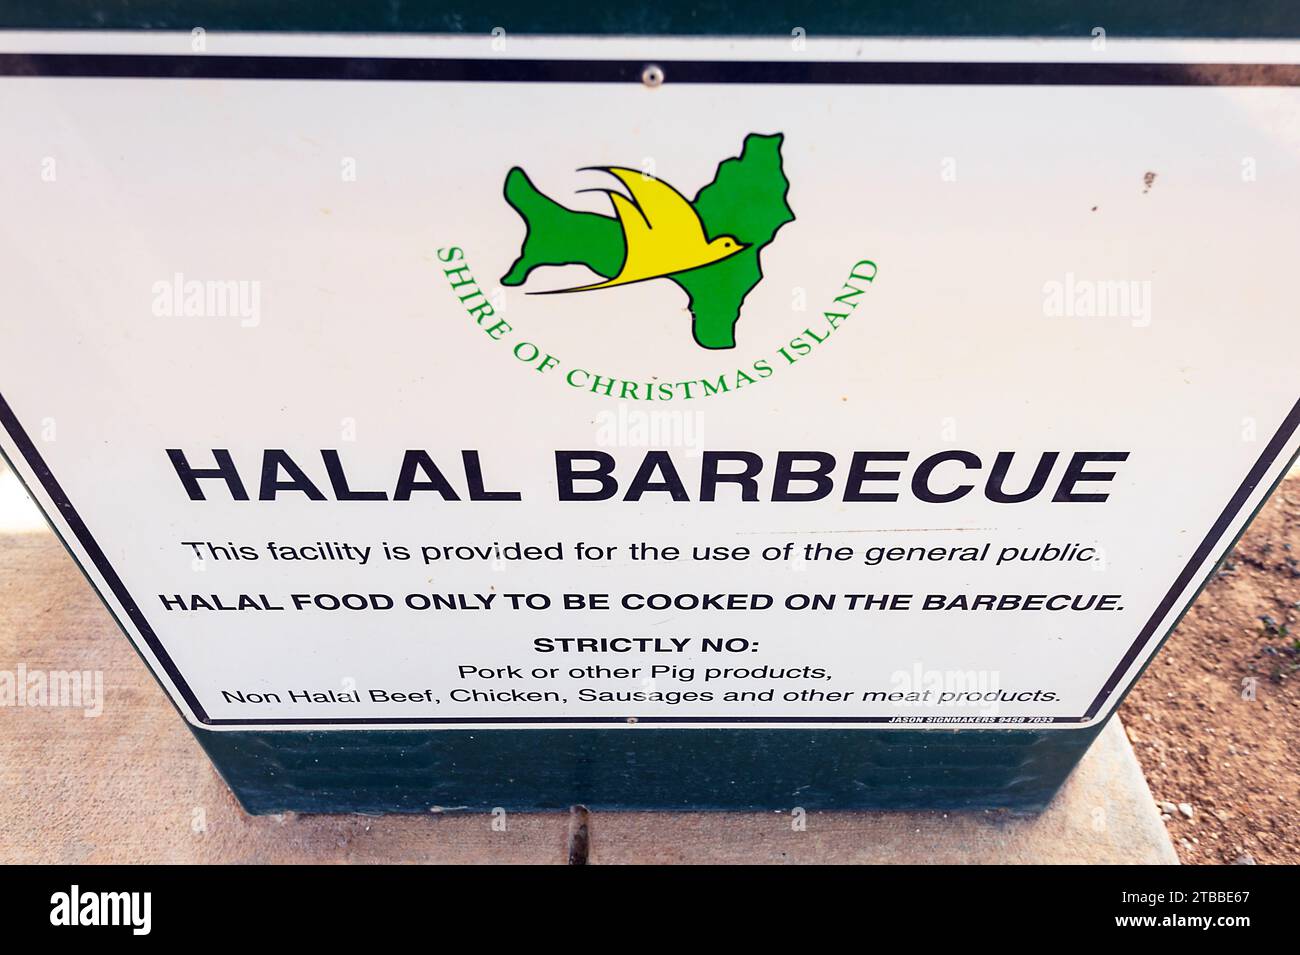 Sign for Halal barbecue on the foreshore of the small town of Settlement, Christmas Island, Australia Stock Photo